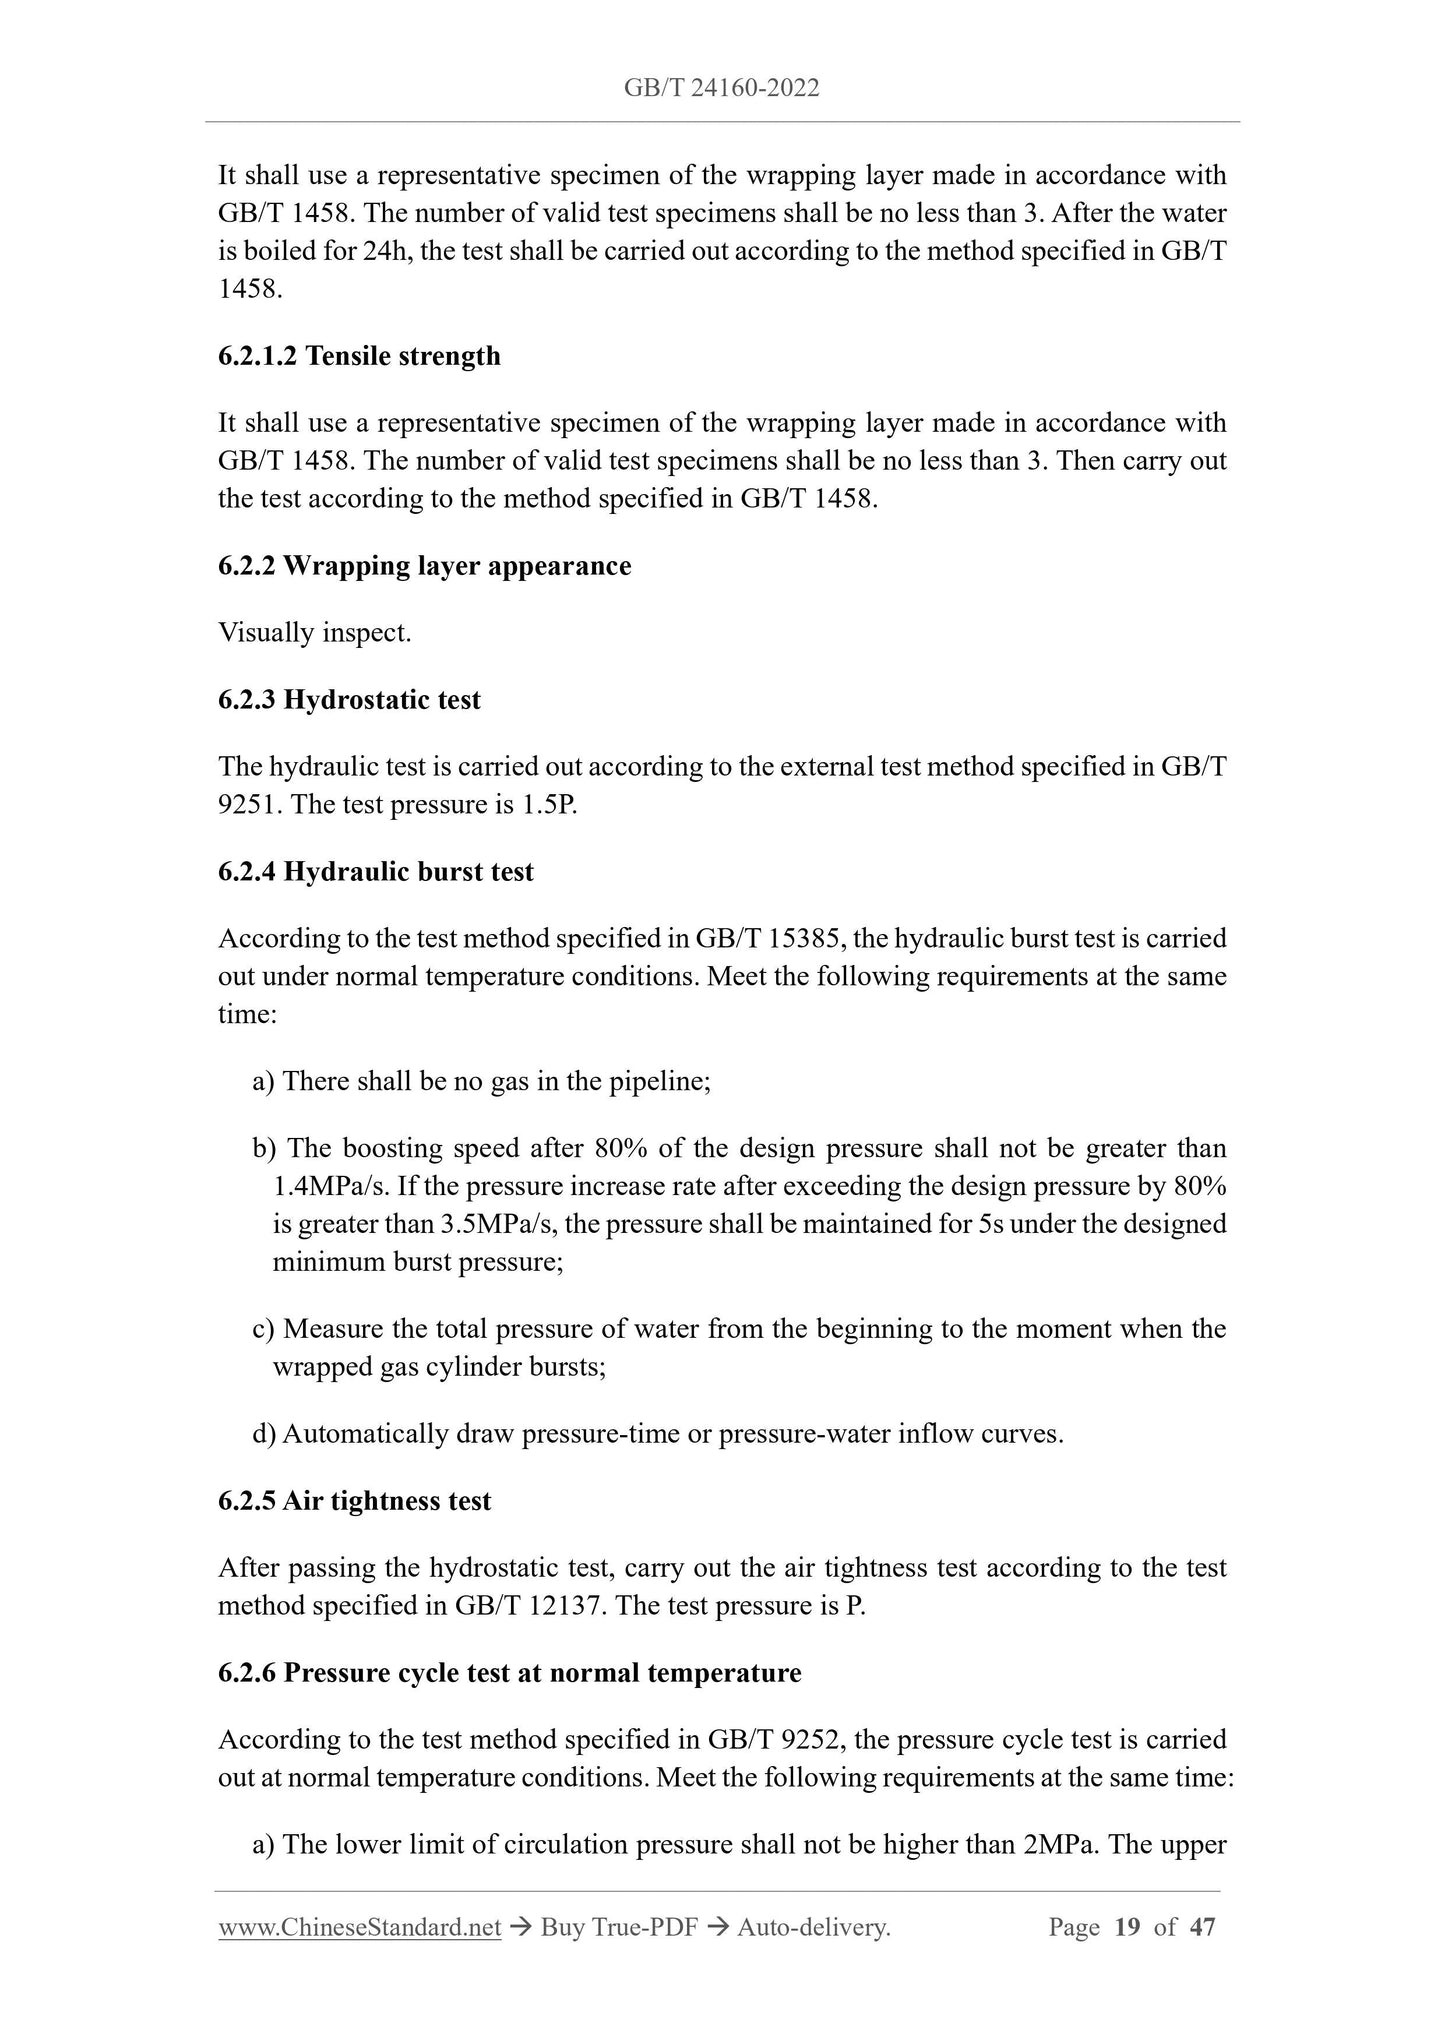 GB/T 24160-2022 Page 10